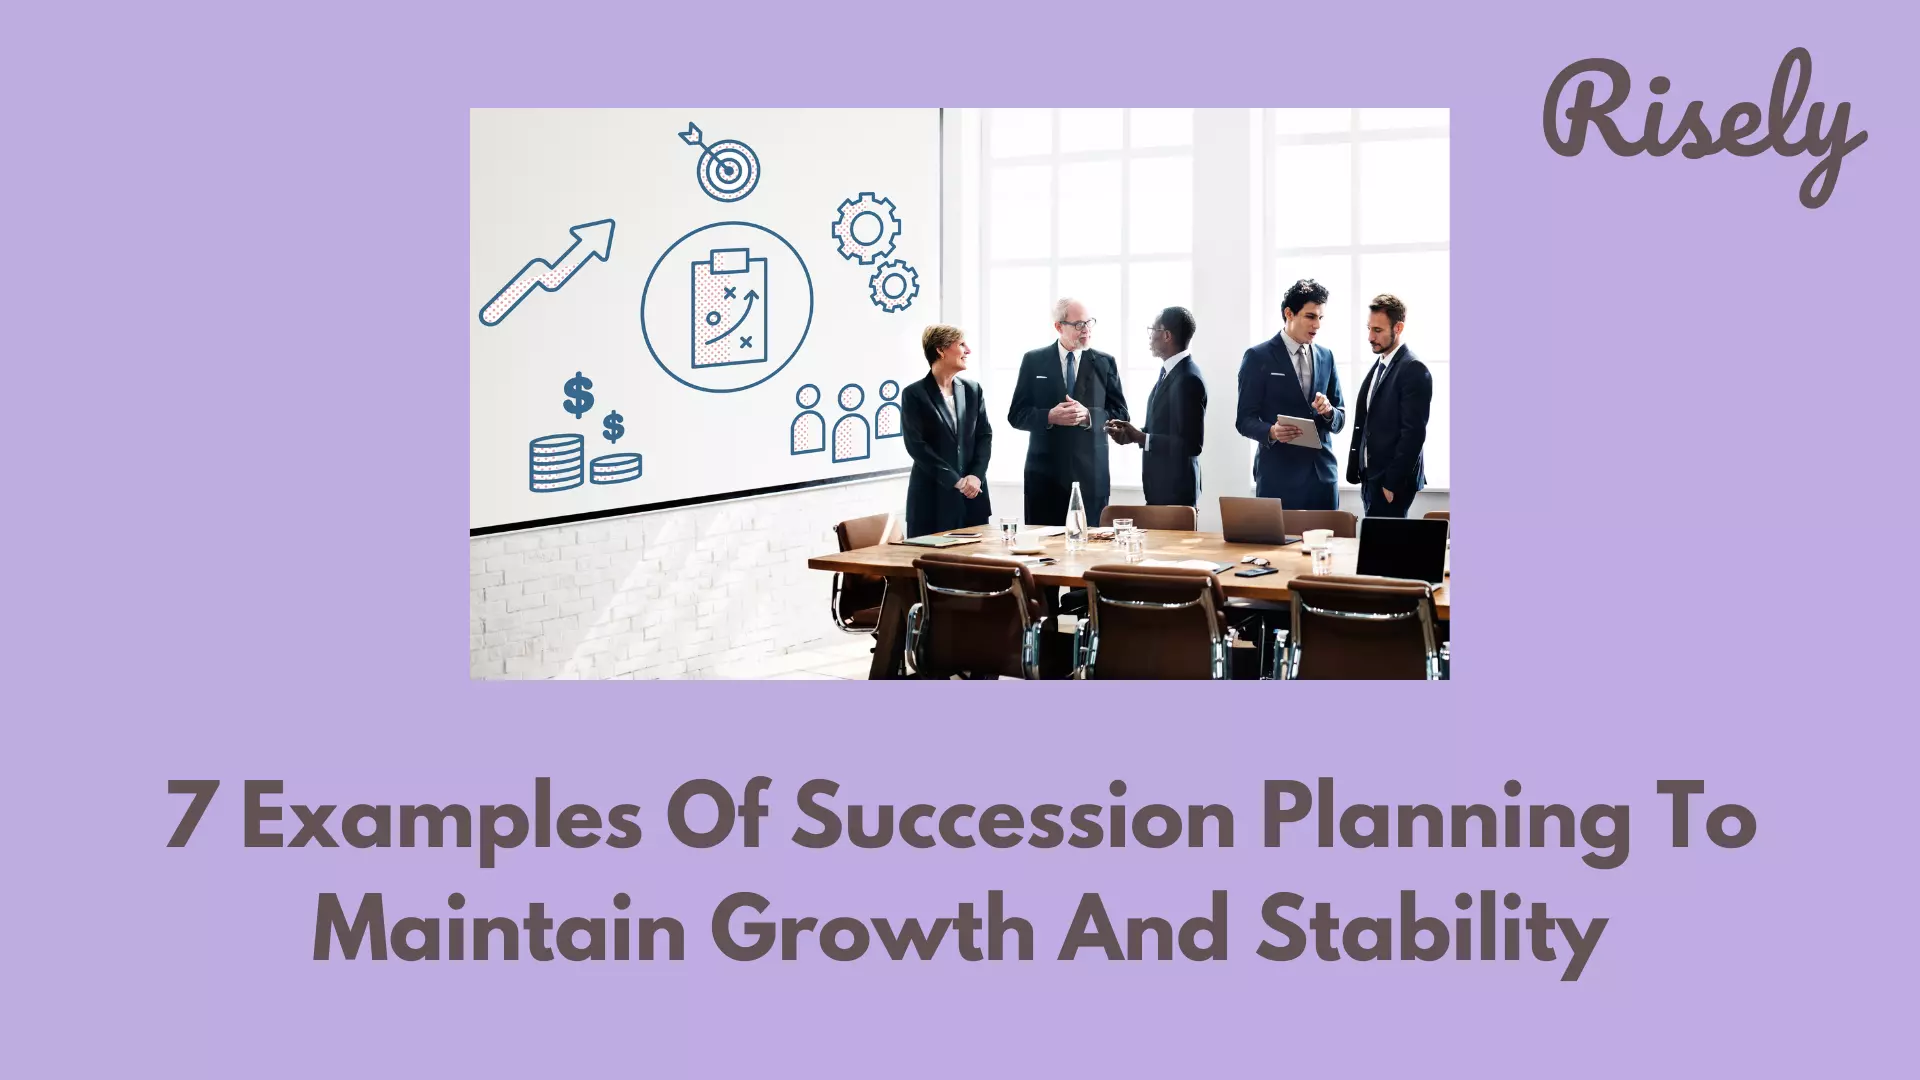 7 Examples Of Succession Planning To Maintain Growth And Stability